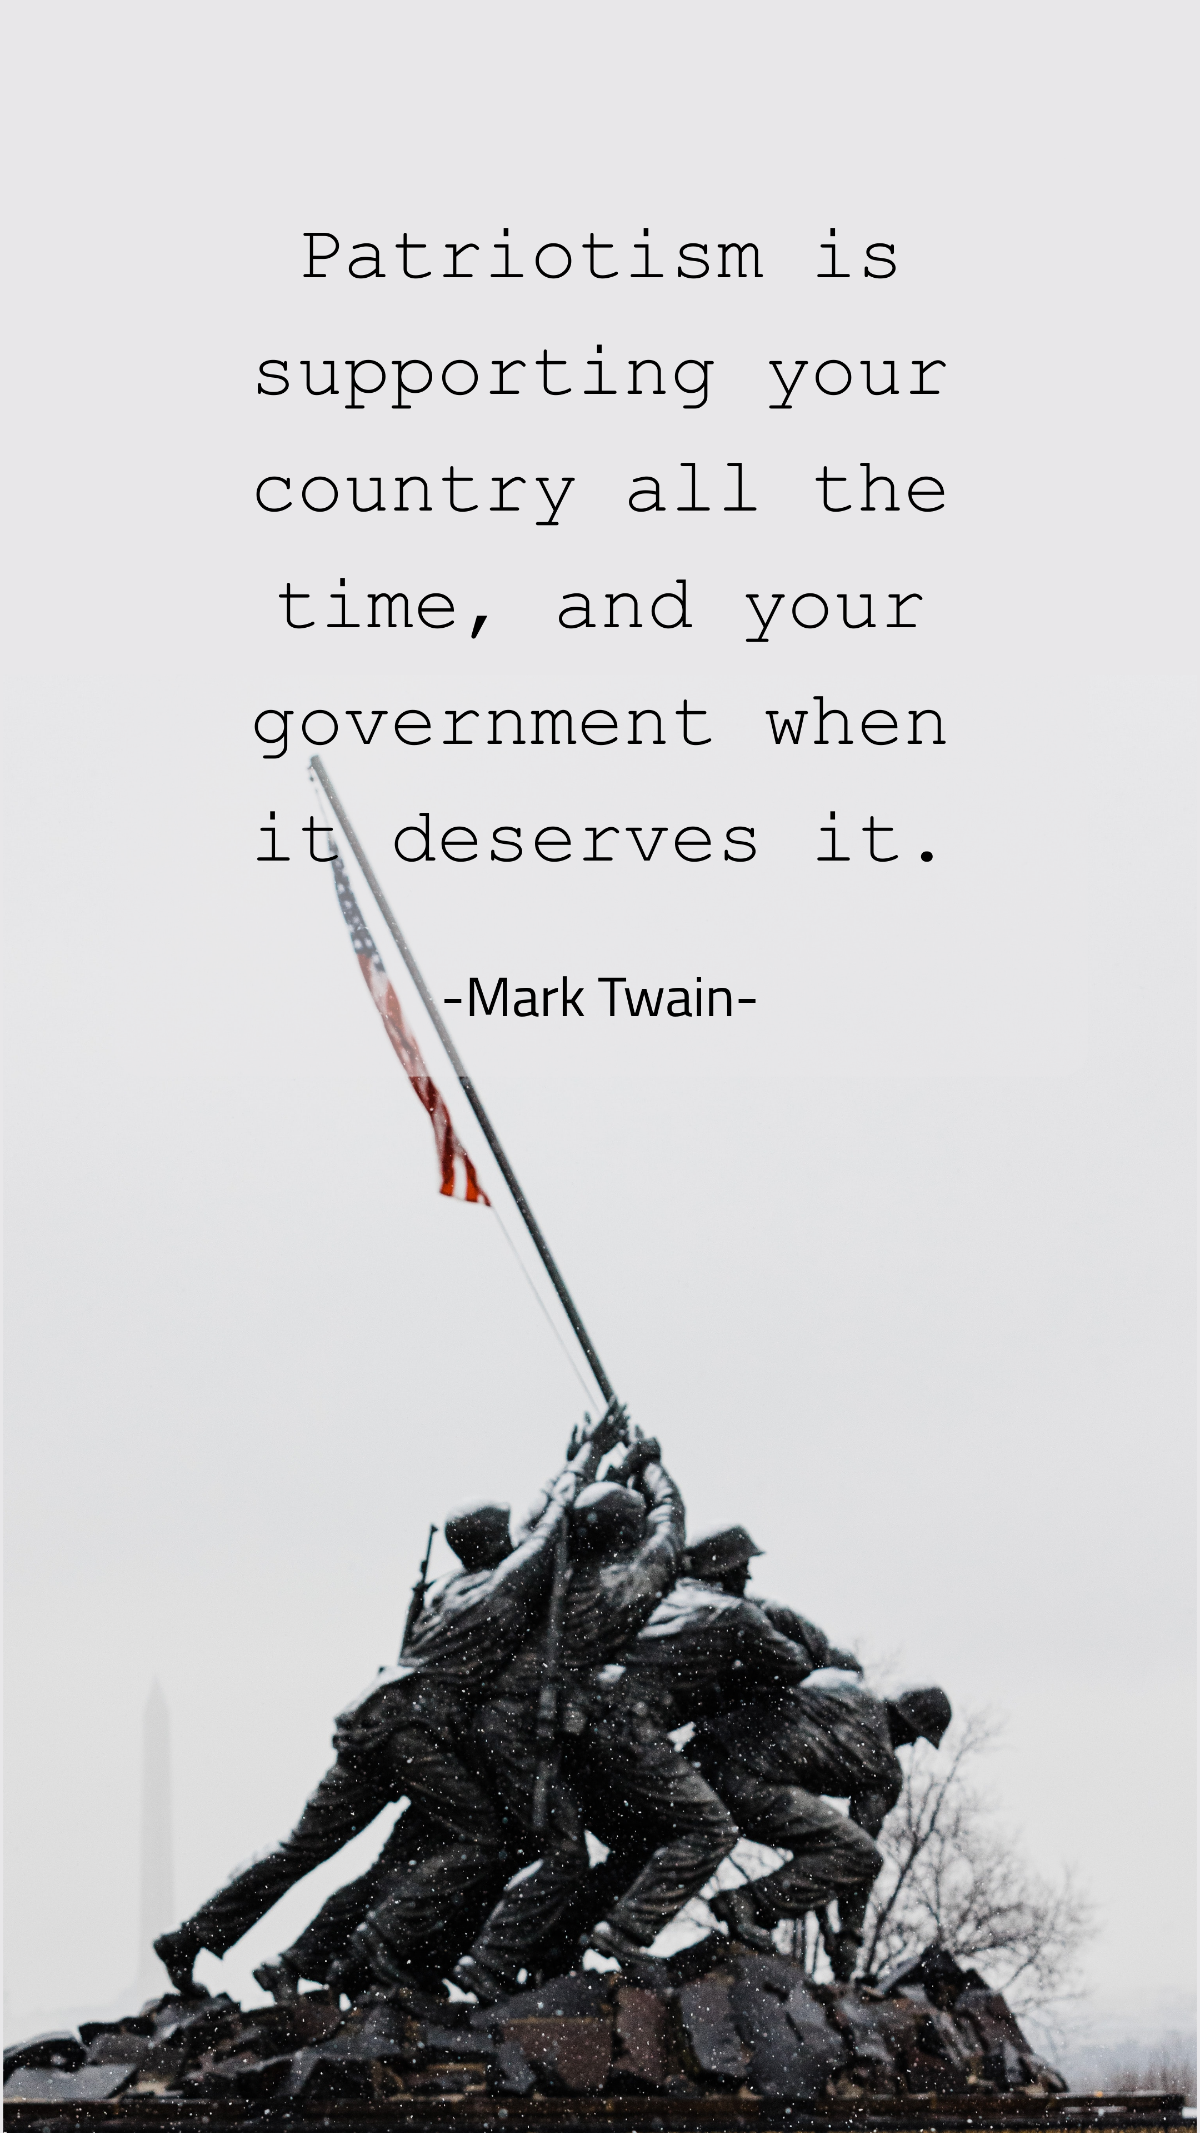 Mark Twain - Patriotism is supporting your country all the time, and your government when it deserves it.